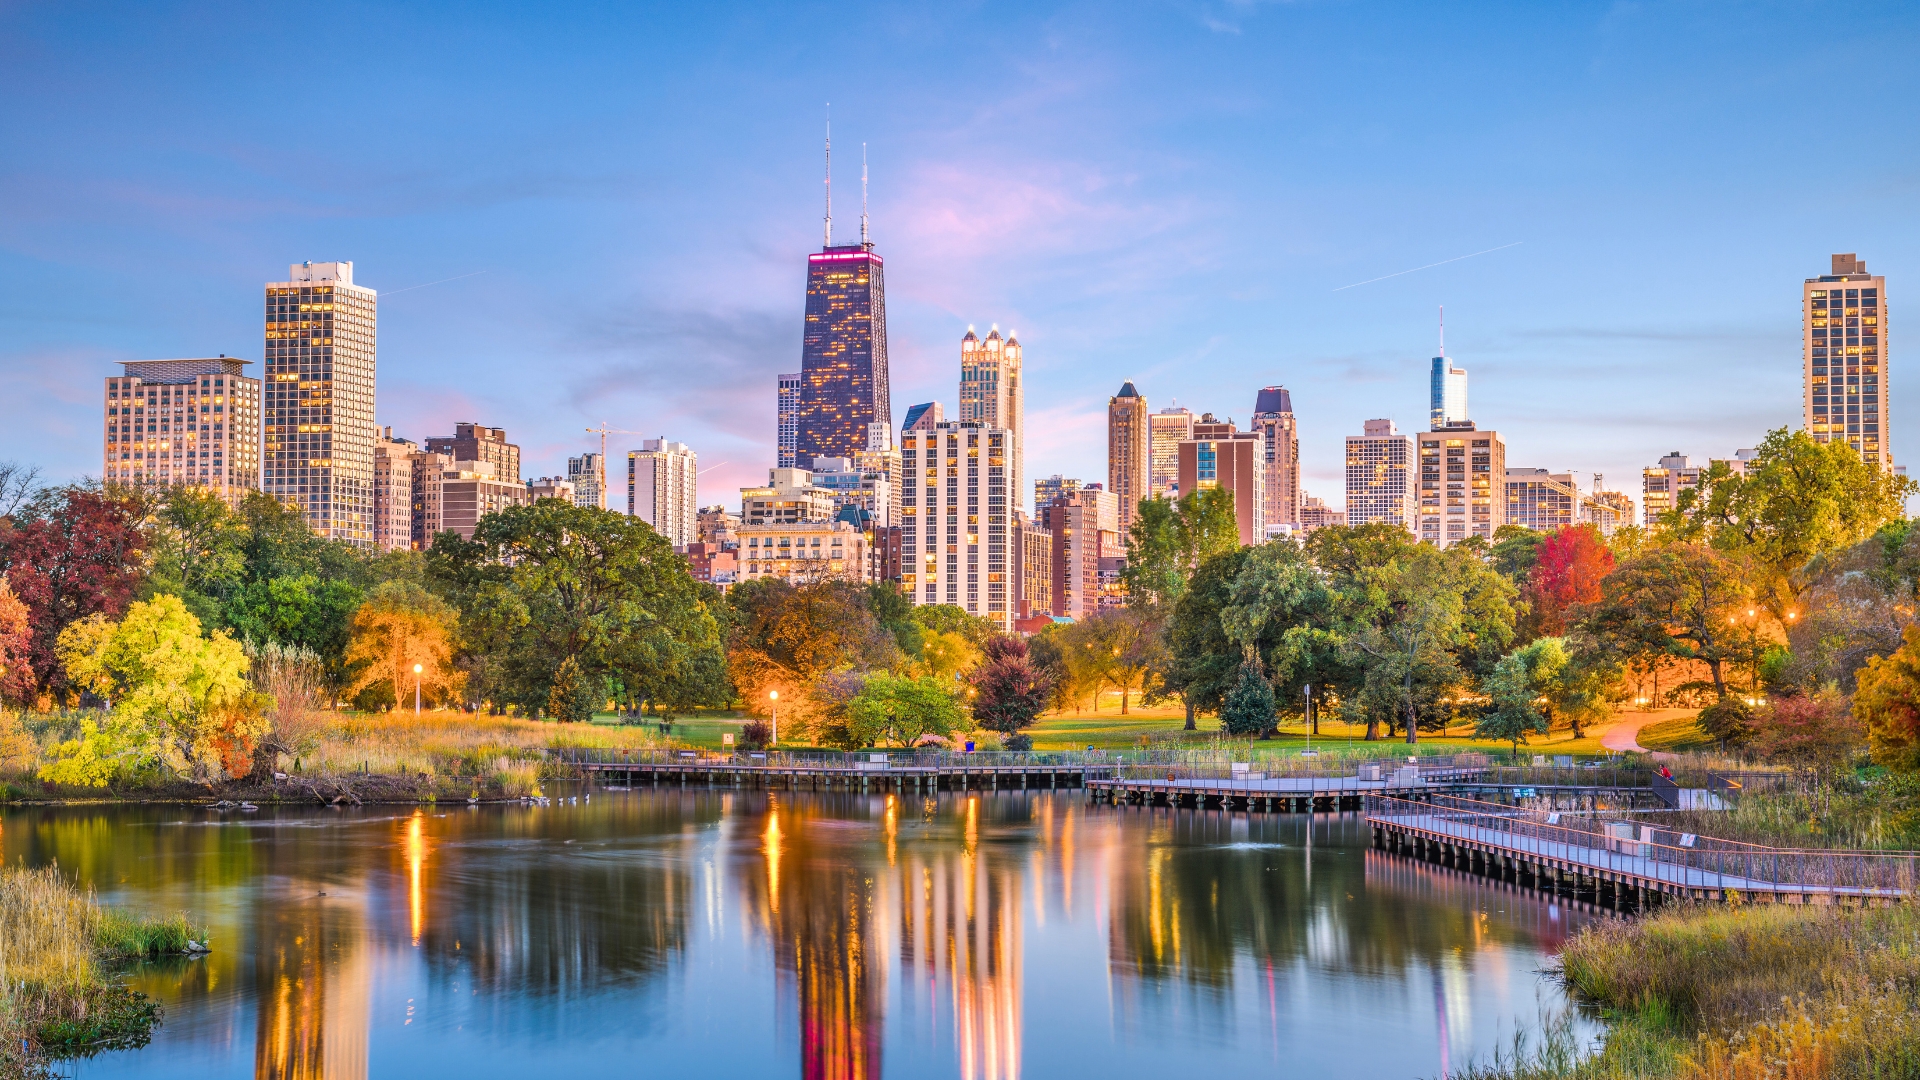 An image of Lincoln Park at sundown with the Chicago skyline illuminating